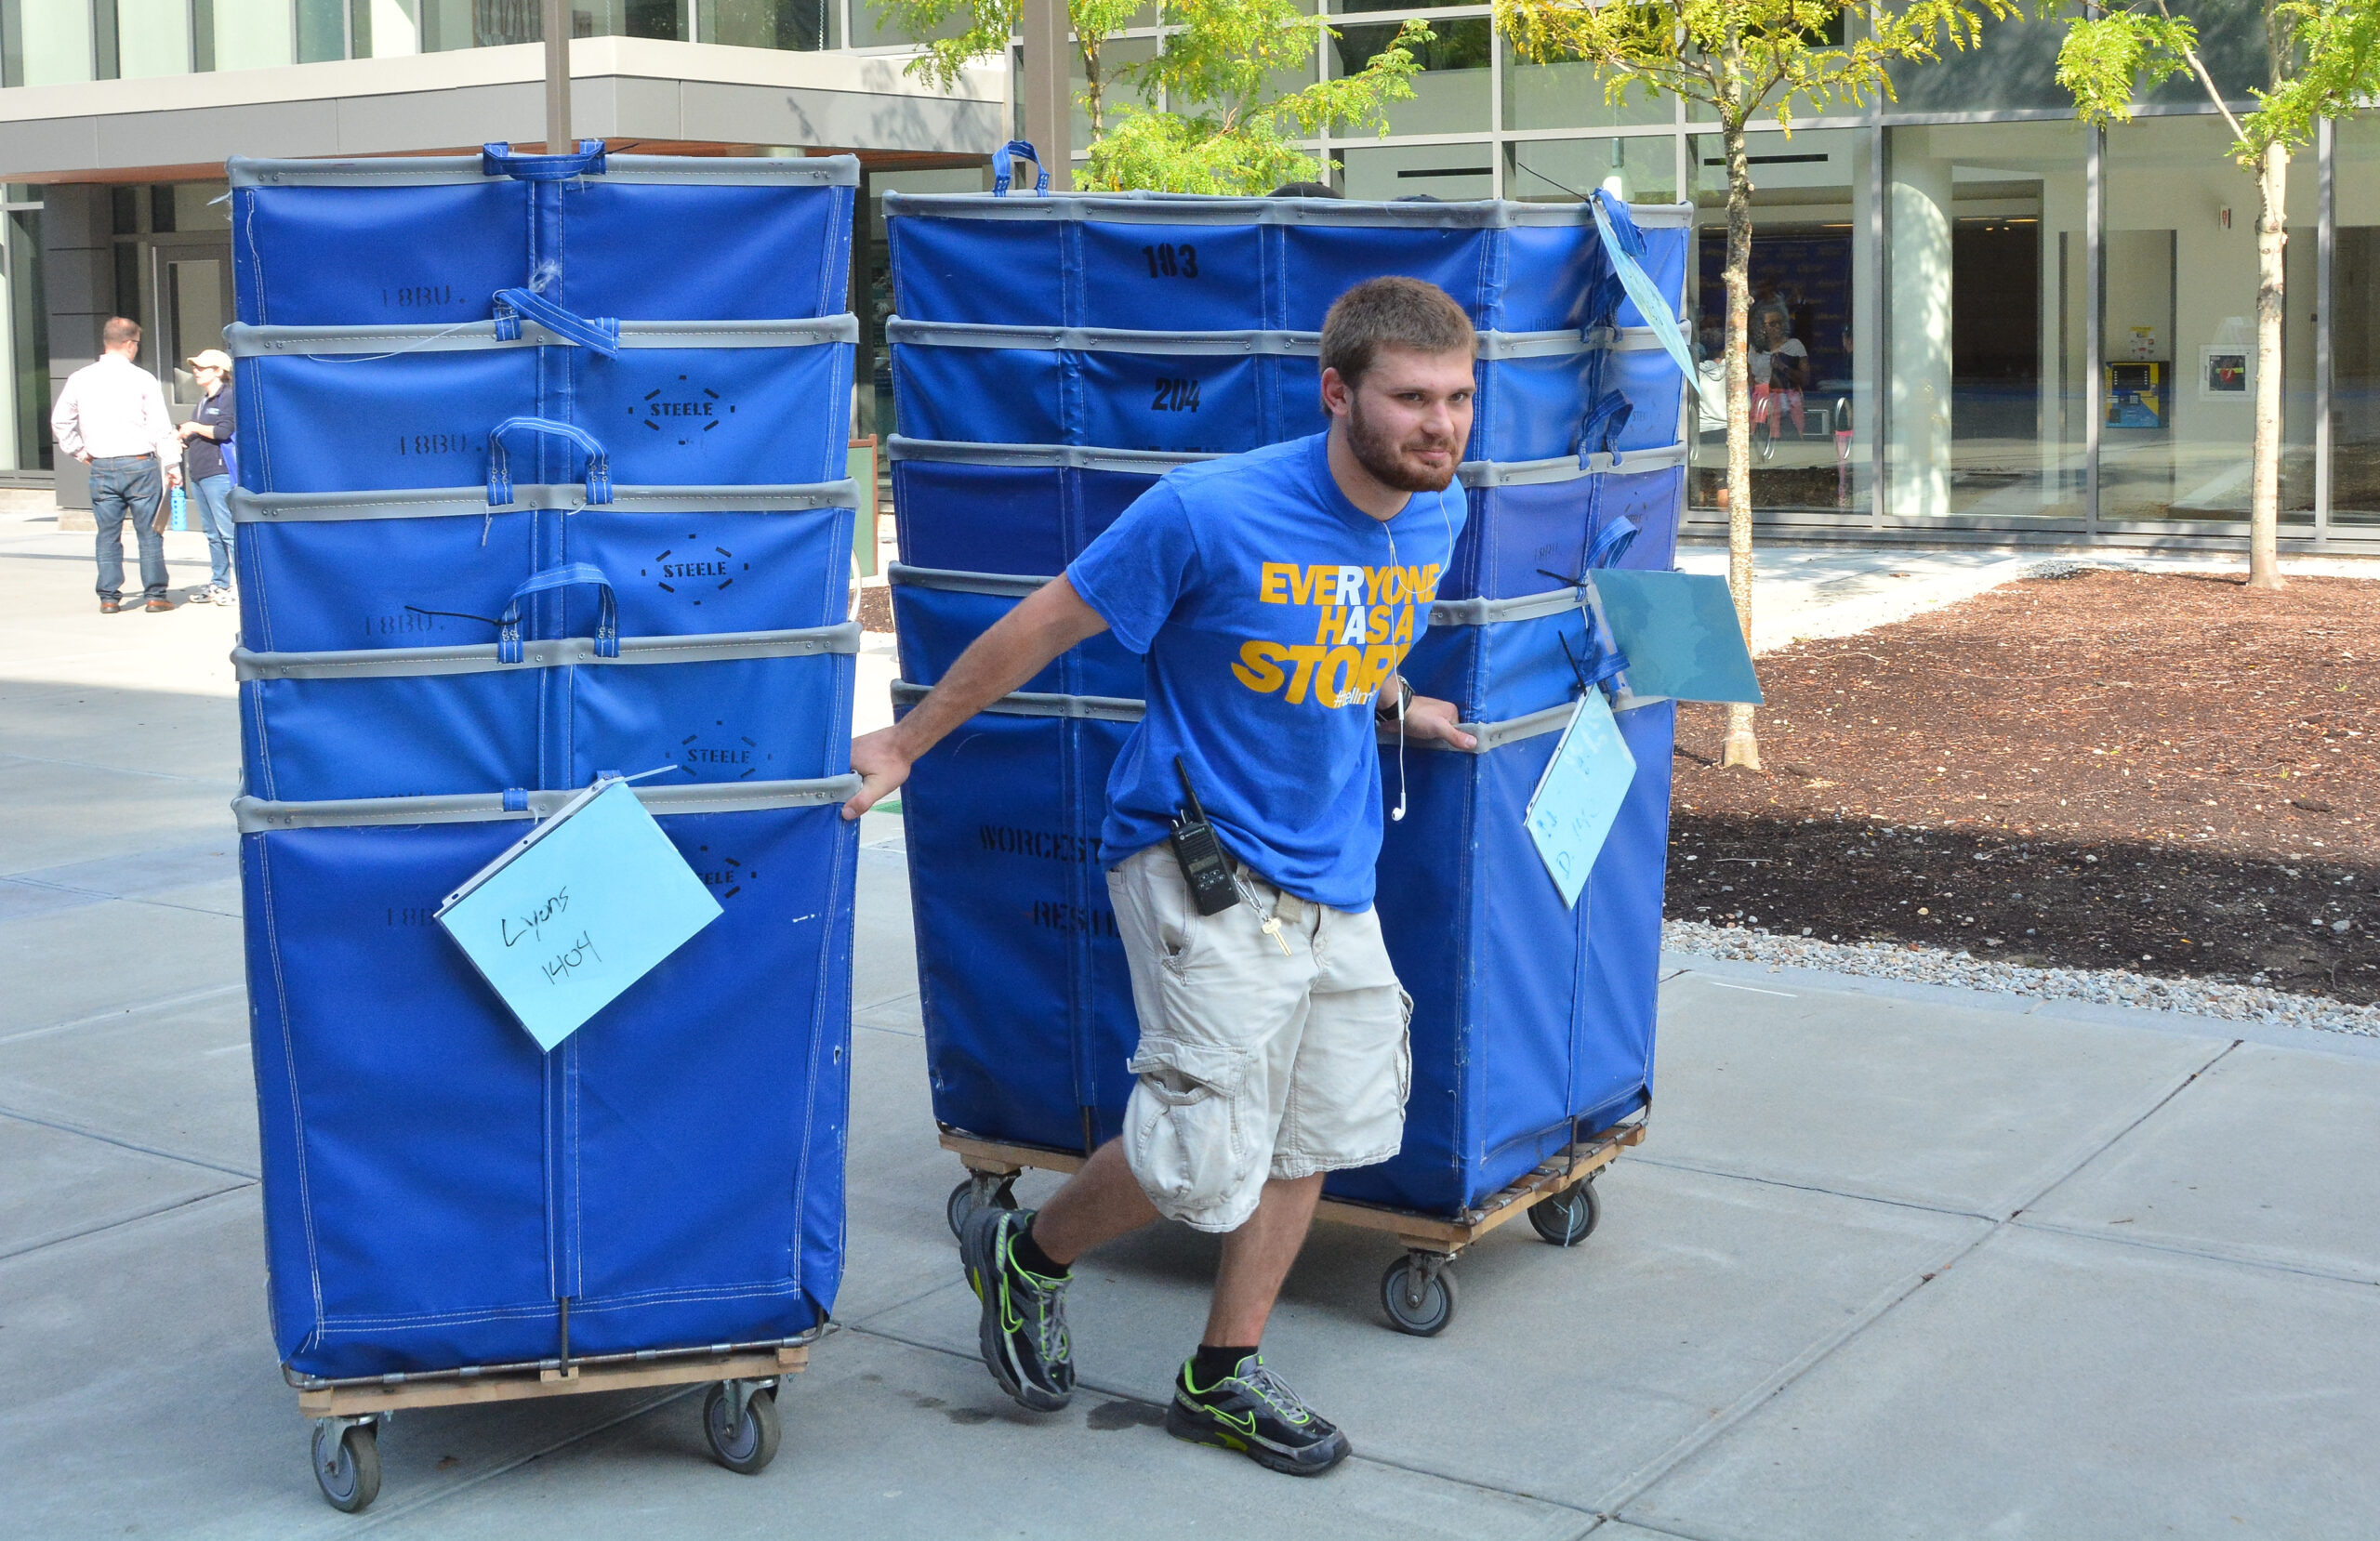 A Worcester state student pulling bins to assist in the move-in process